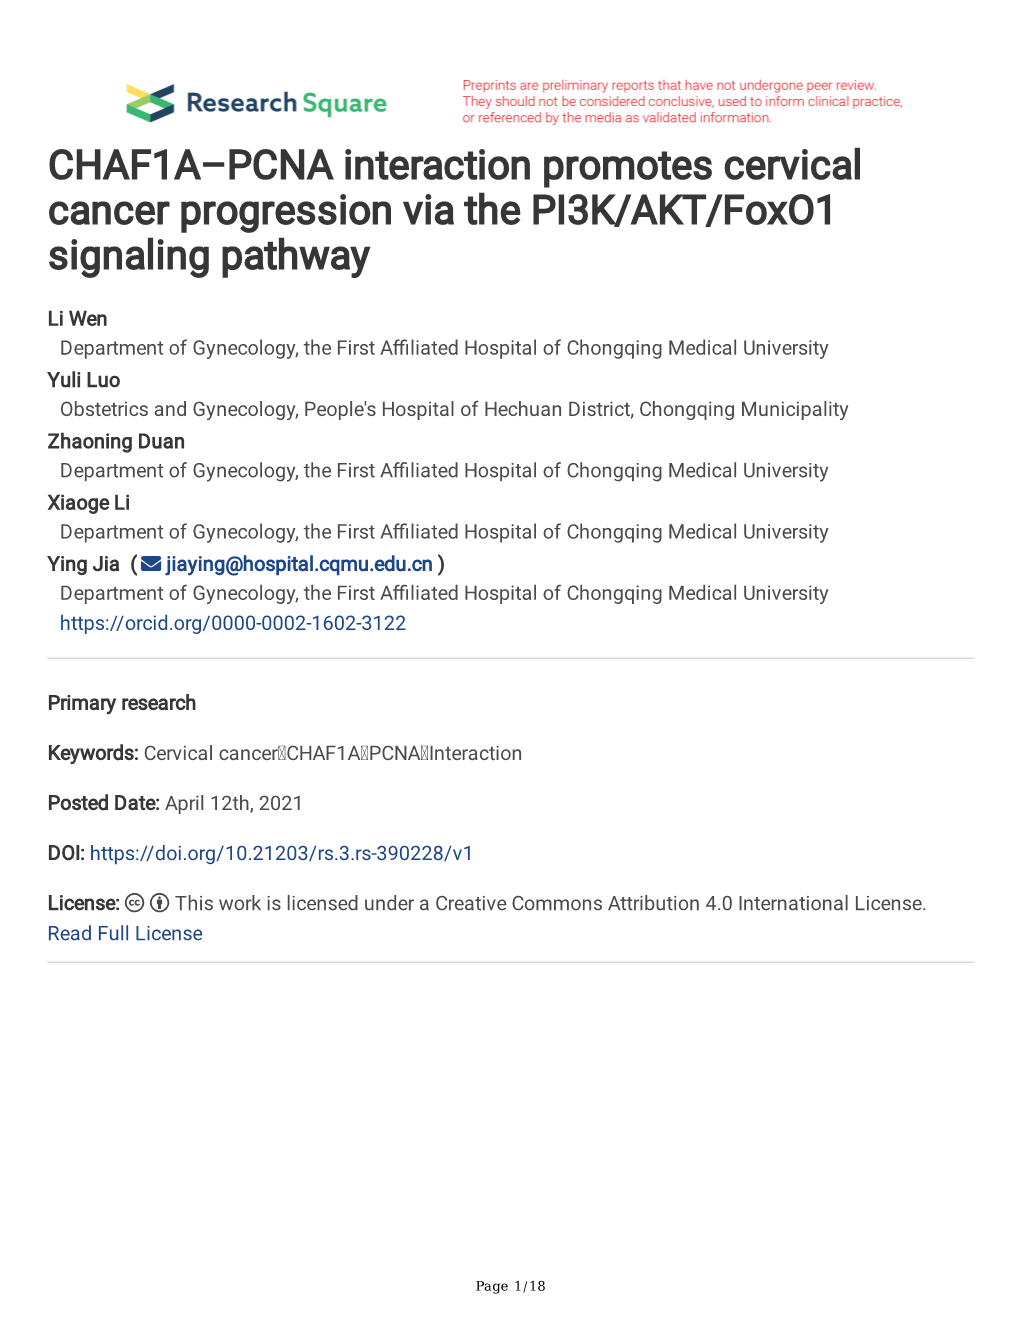 CHAF1A–PCNA Interaction Promotes Cervical Cancer Progression Via the PI3K/AKT/Foxo1 Signaling Pathway